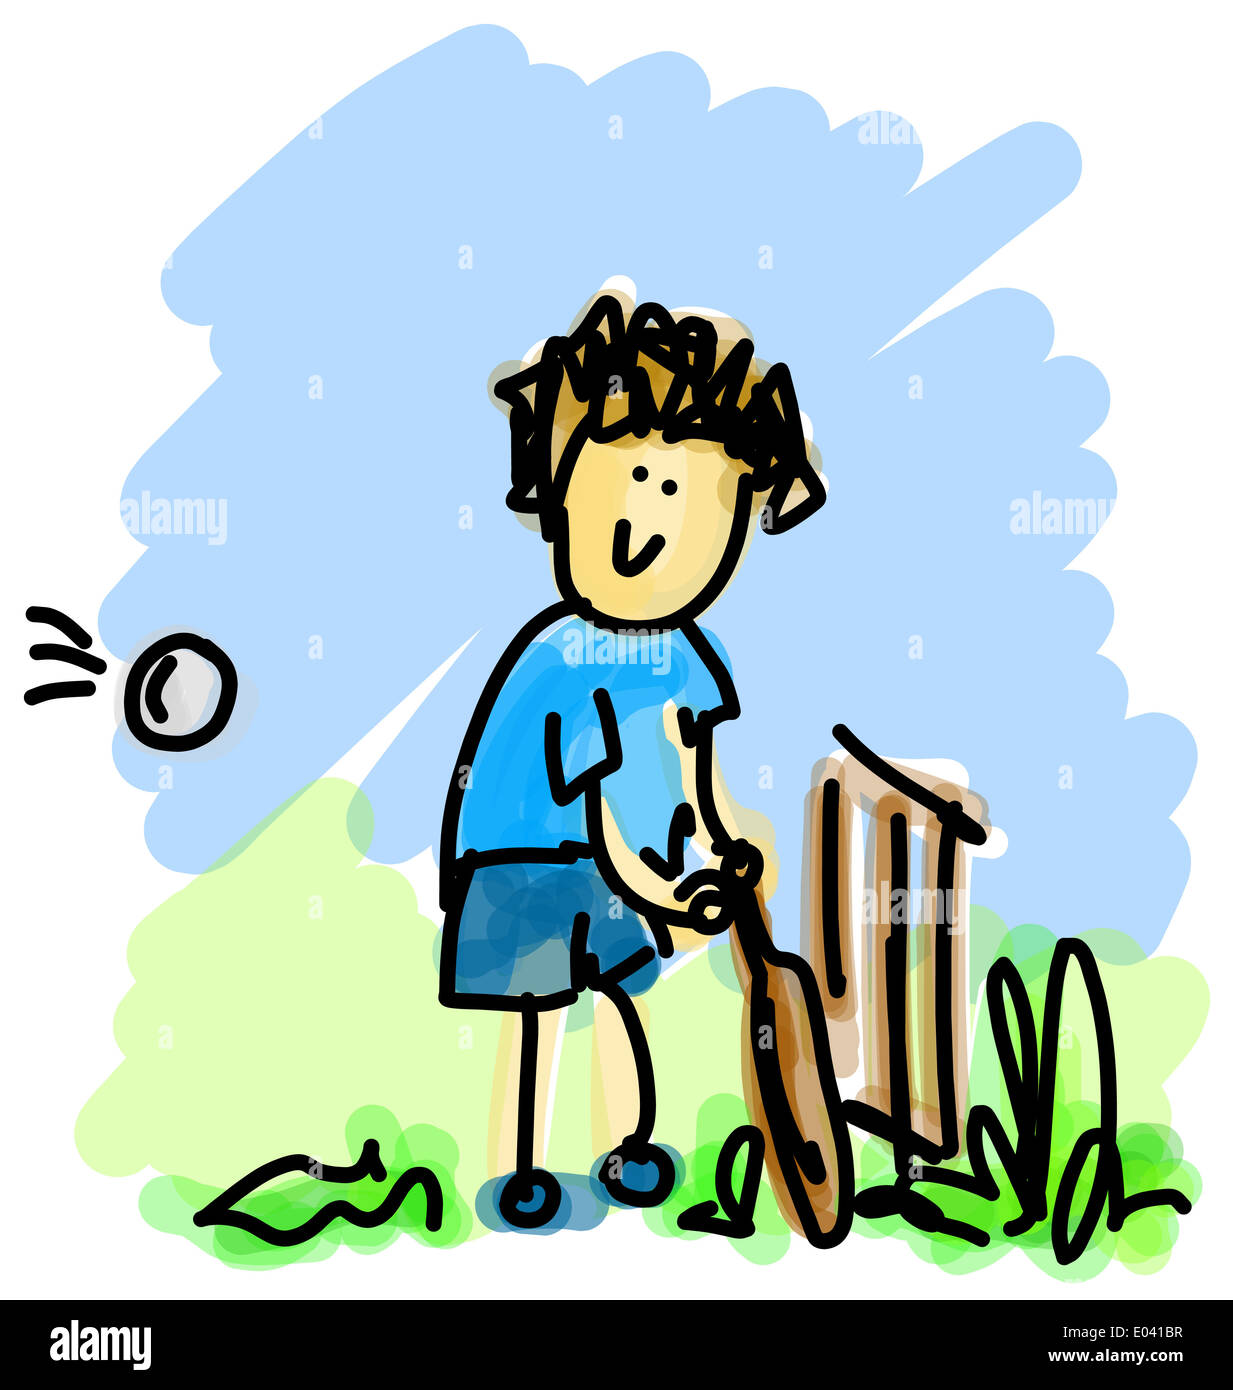 Illustration of a cricketer Stock Photo